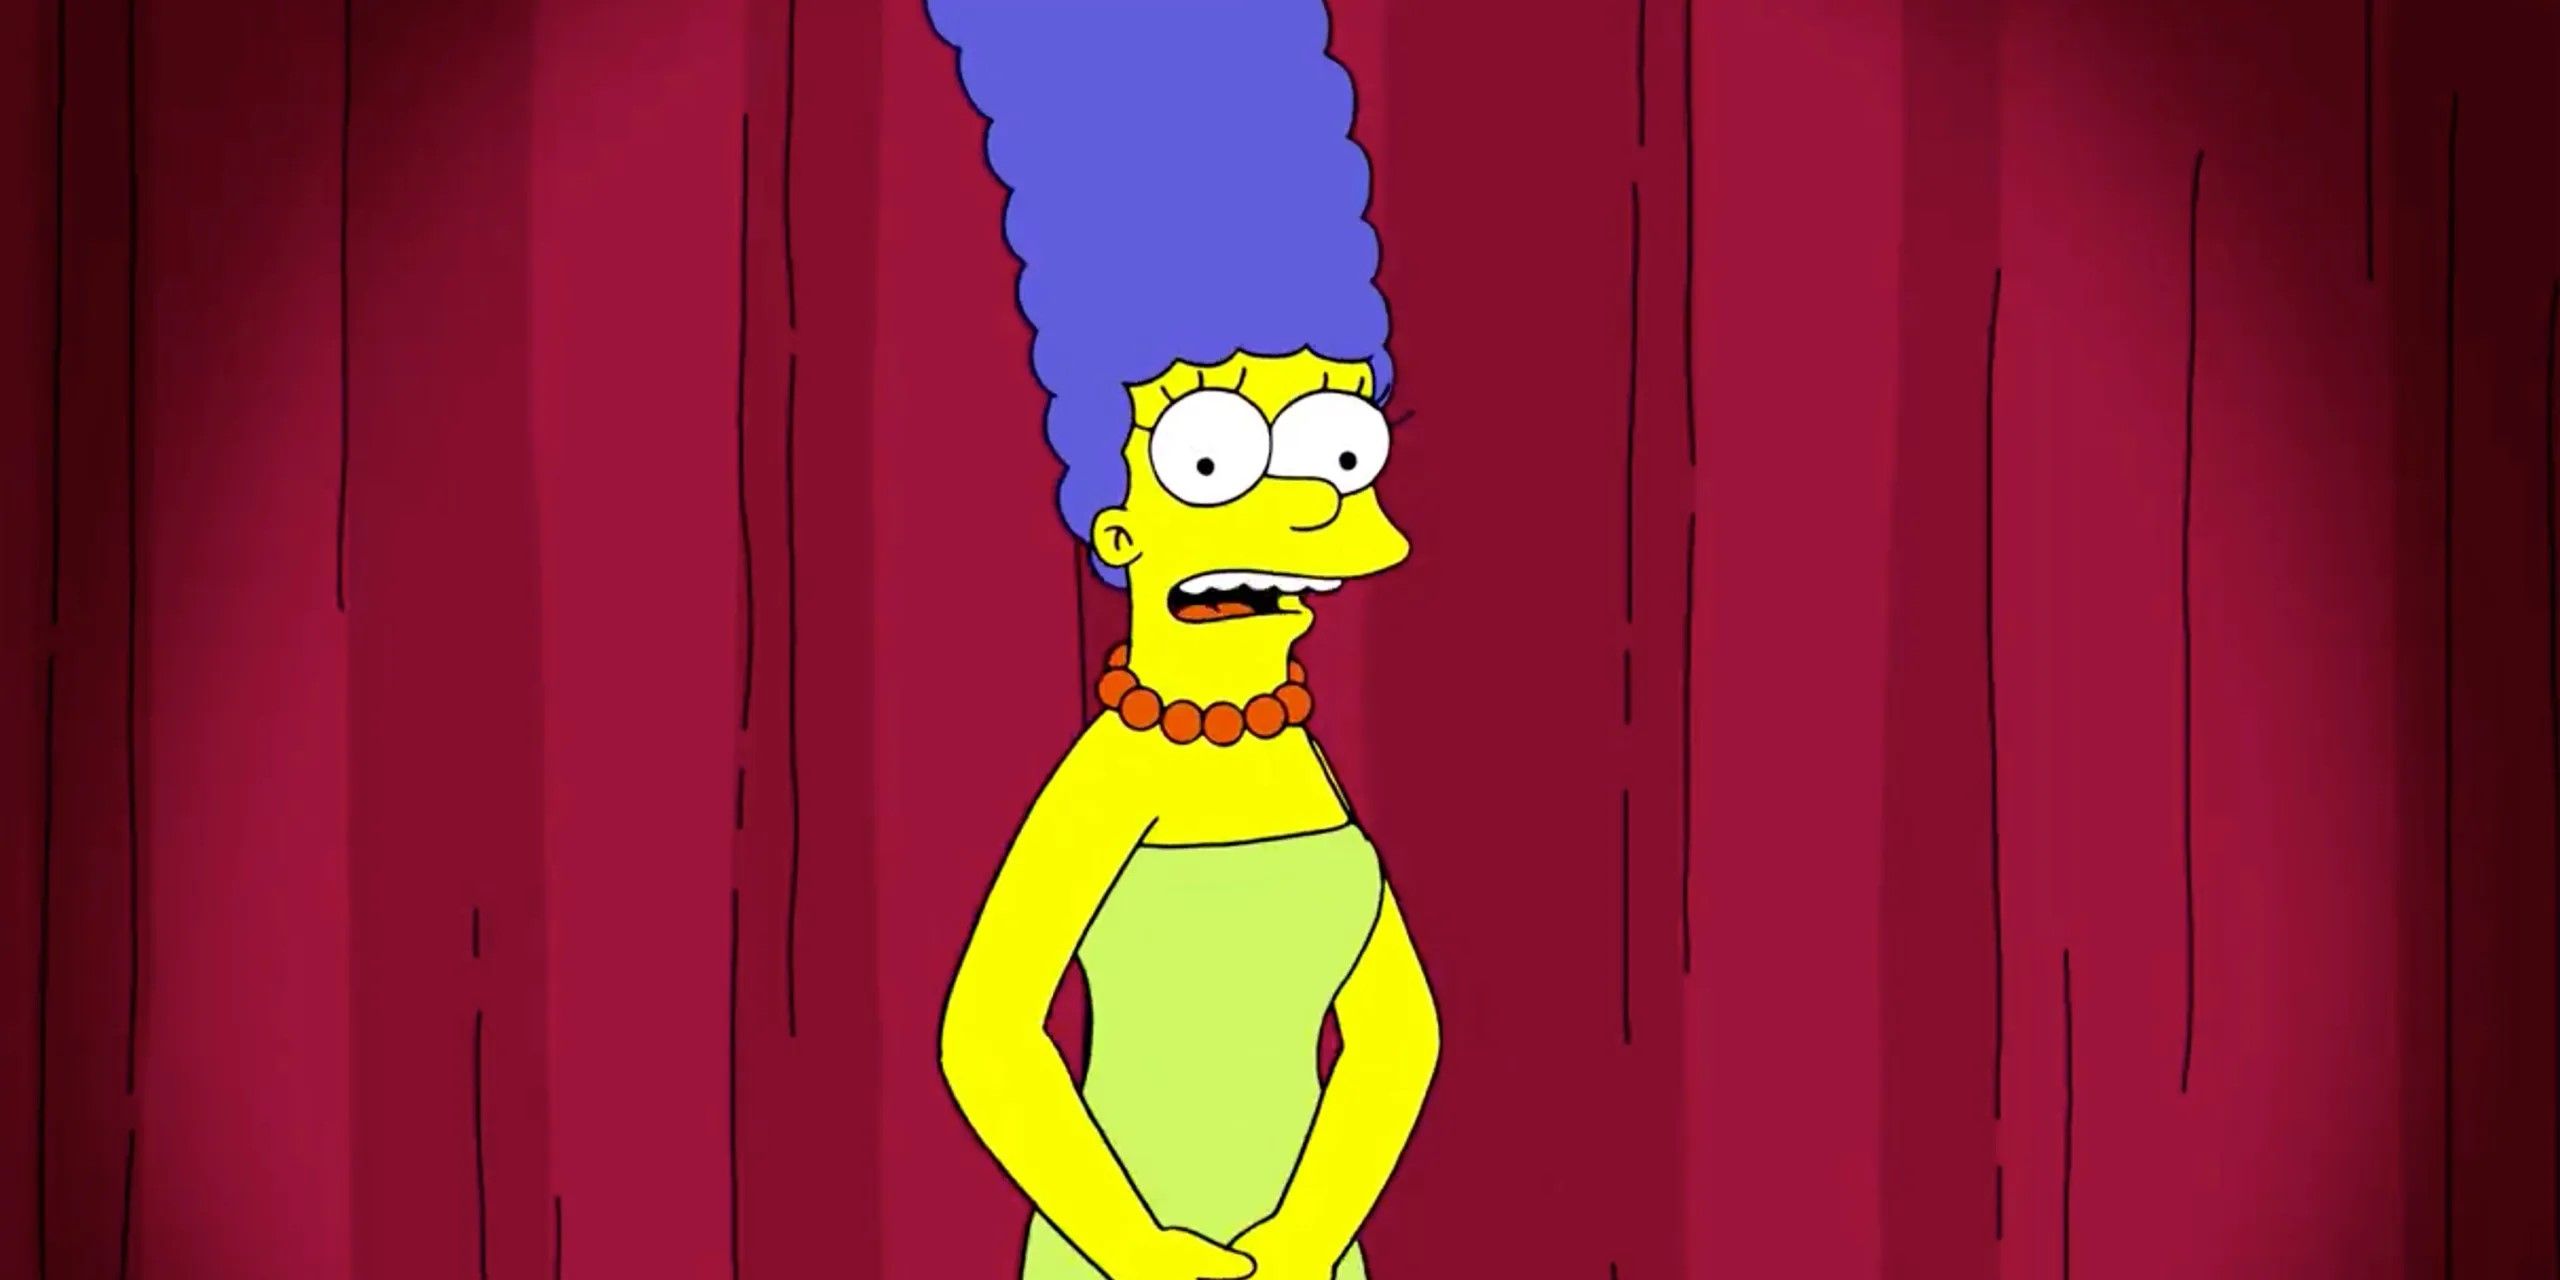 marge-simpson-in-front-of-curtains